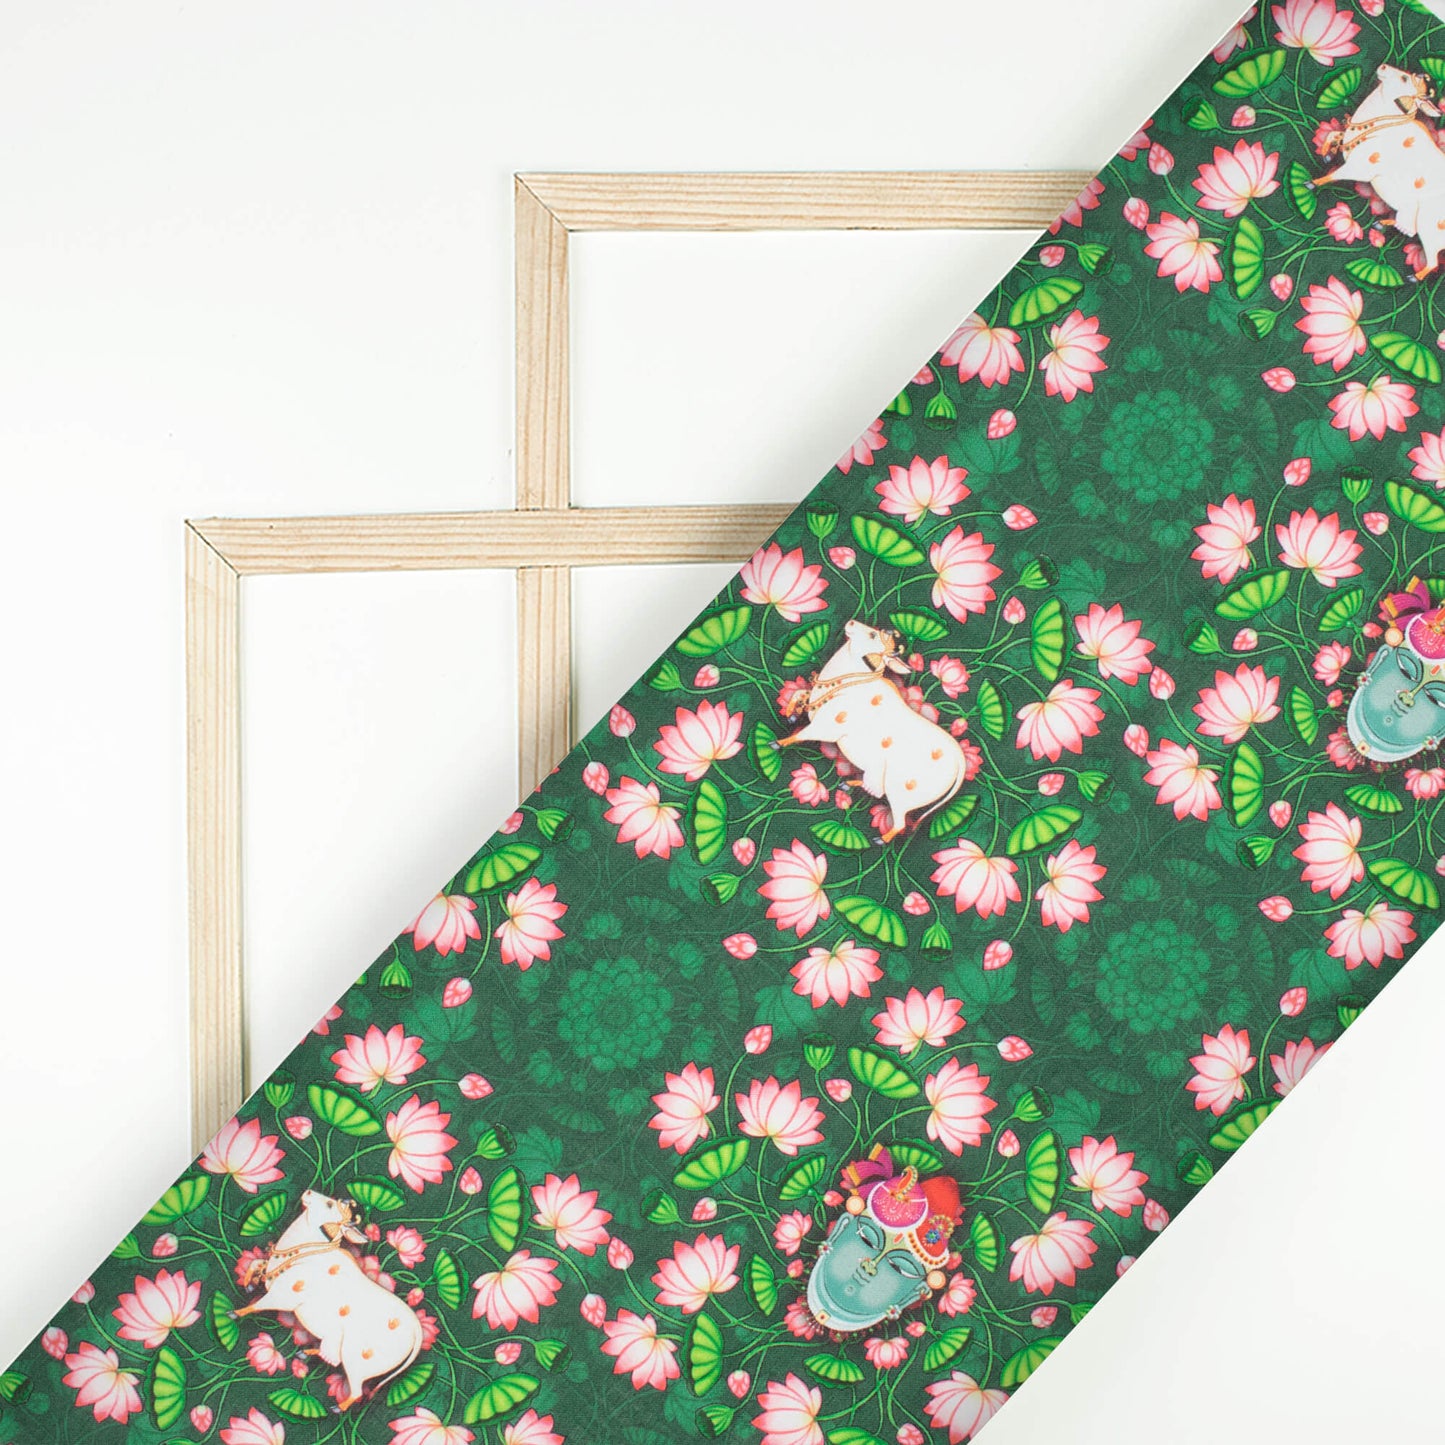 Forest Green And Taffy Pink Pichwaii Pattern Digital Print Poly Cambric Fabric